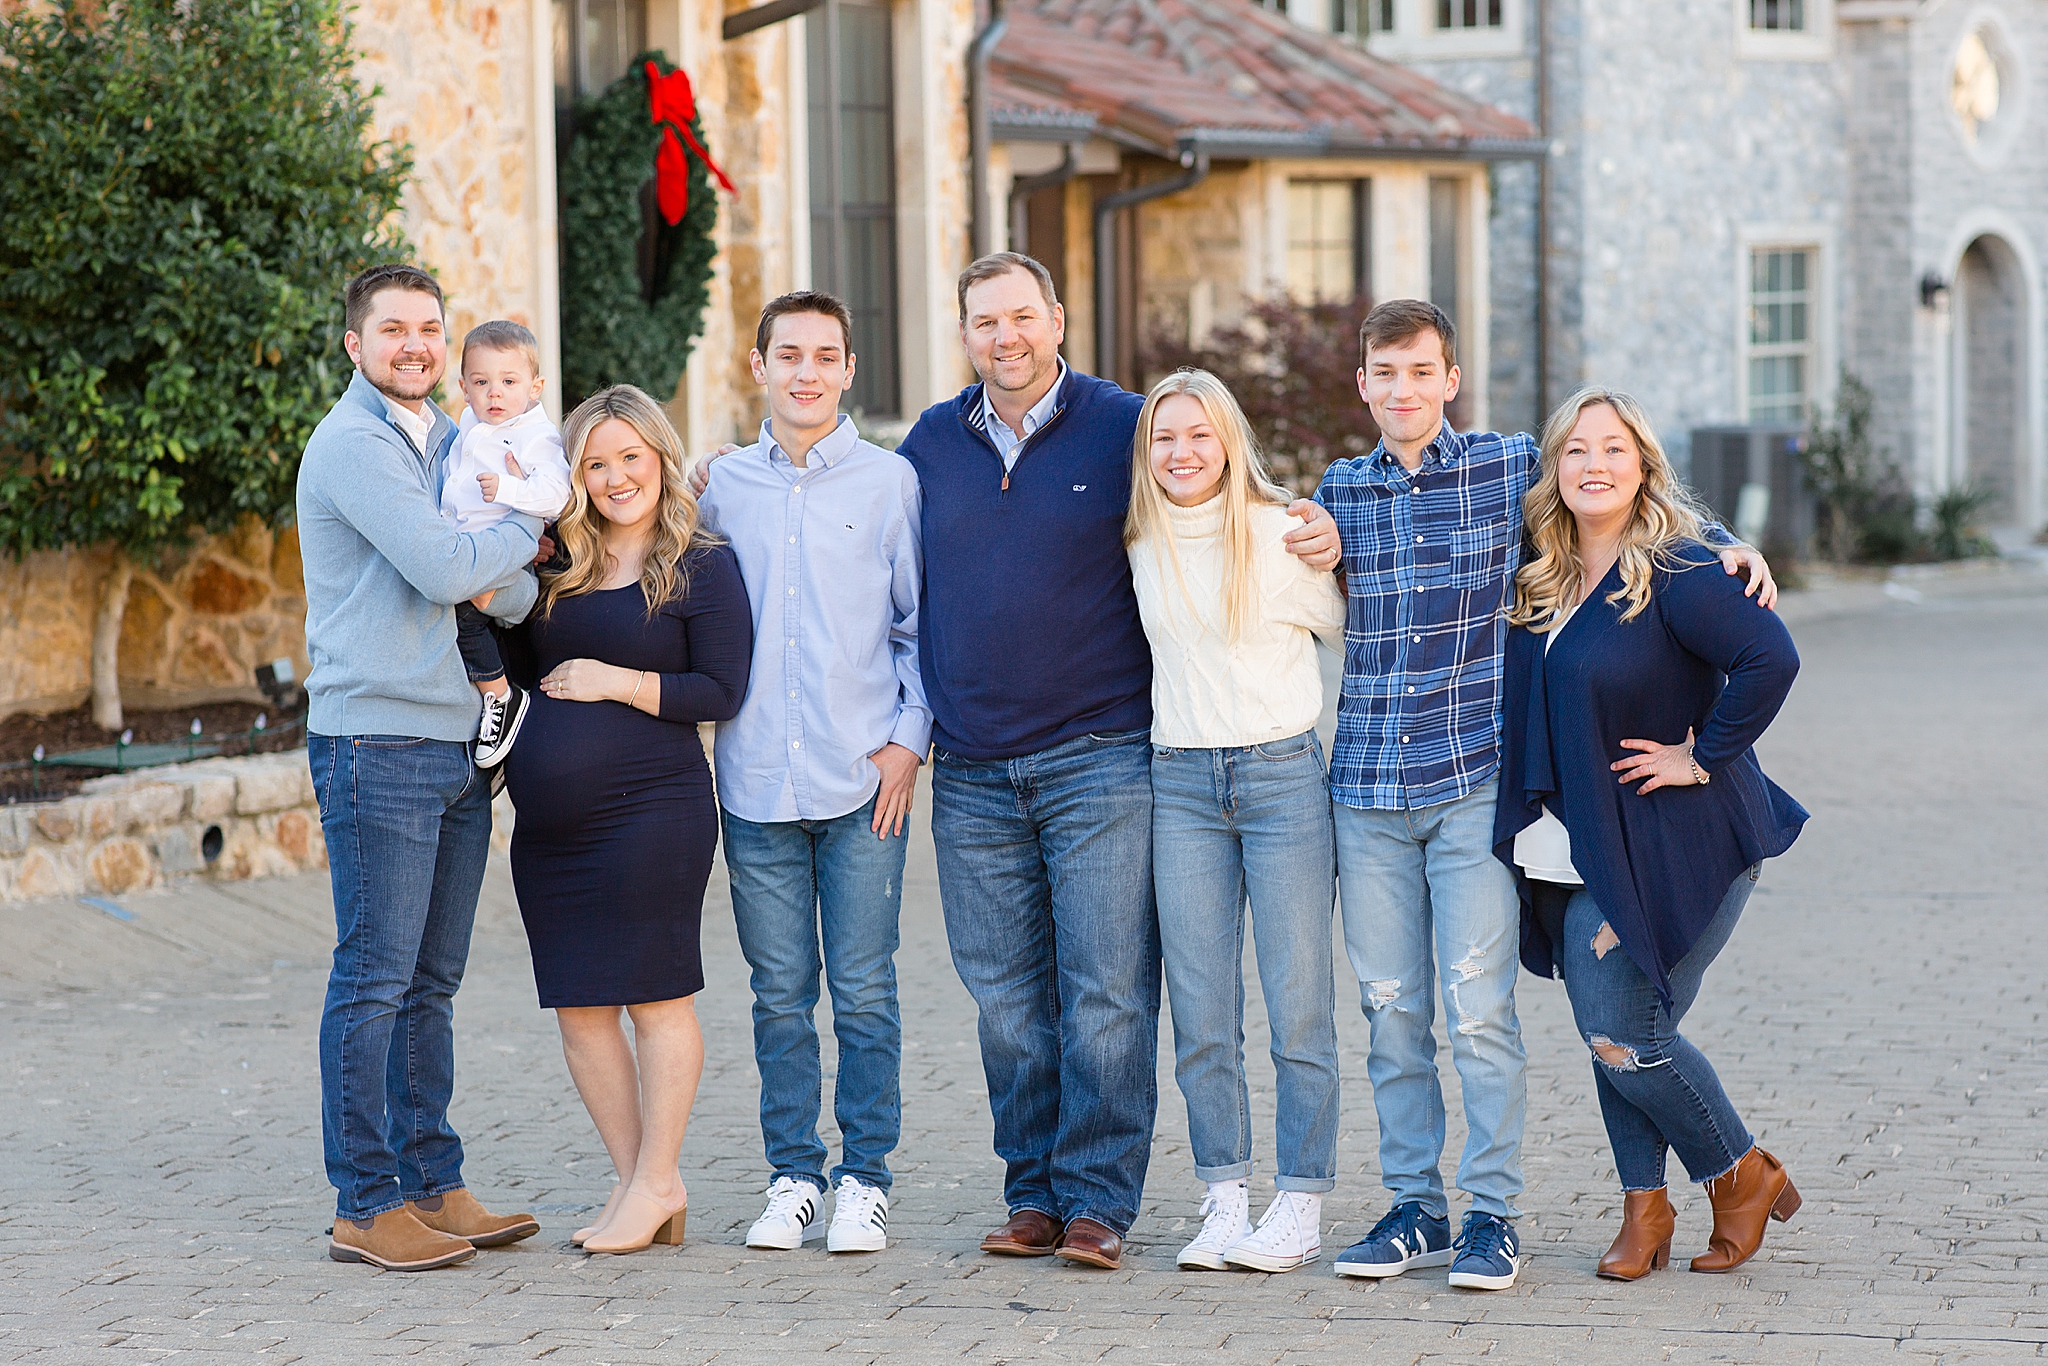 McKinney extended family session in local neighborhood around Christmas